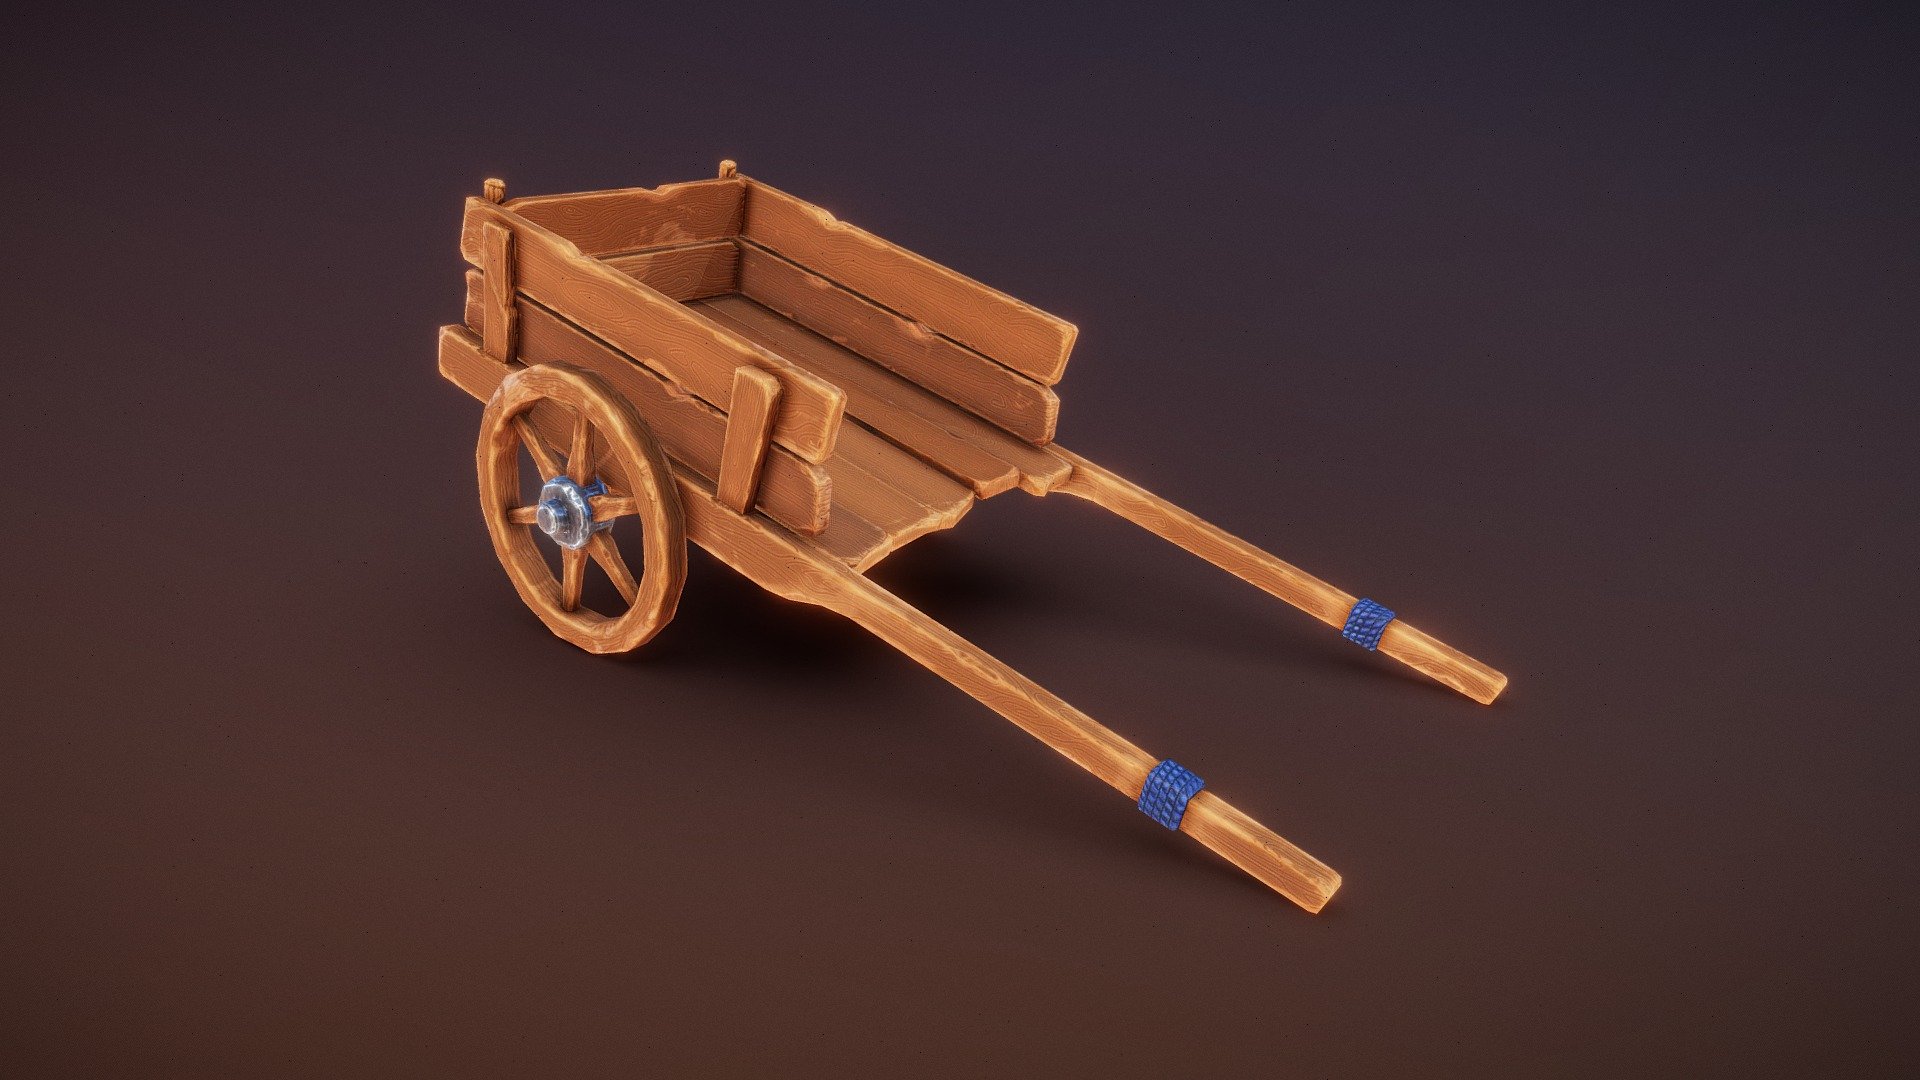 Has your village been pillaged? Do you need to haul some medieval goods around the farm? Or perhaps the market has a grain surplus? No matter, this high-detail stylzied wooden hand cart will do the trick! Modeled in Maya, hand-sculpted in ZBrush, textured in Substance 3D Painter 3d model